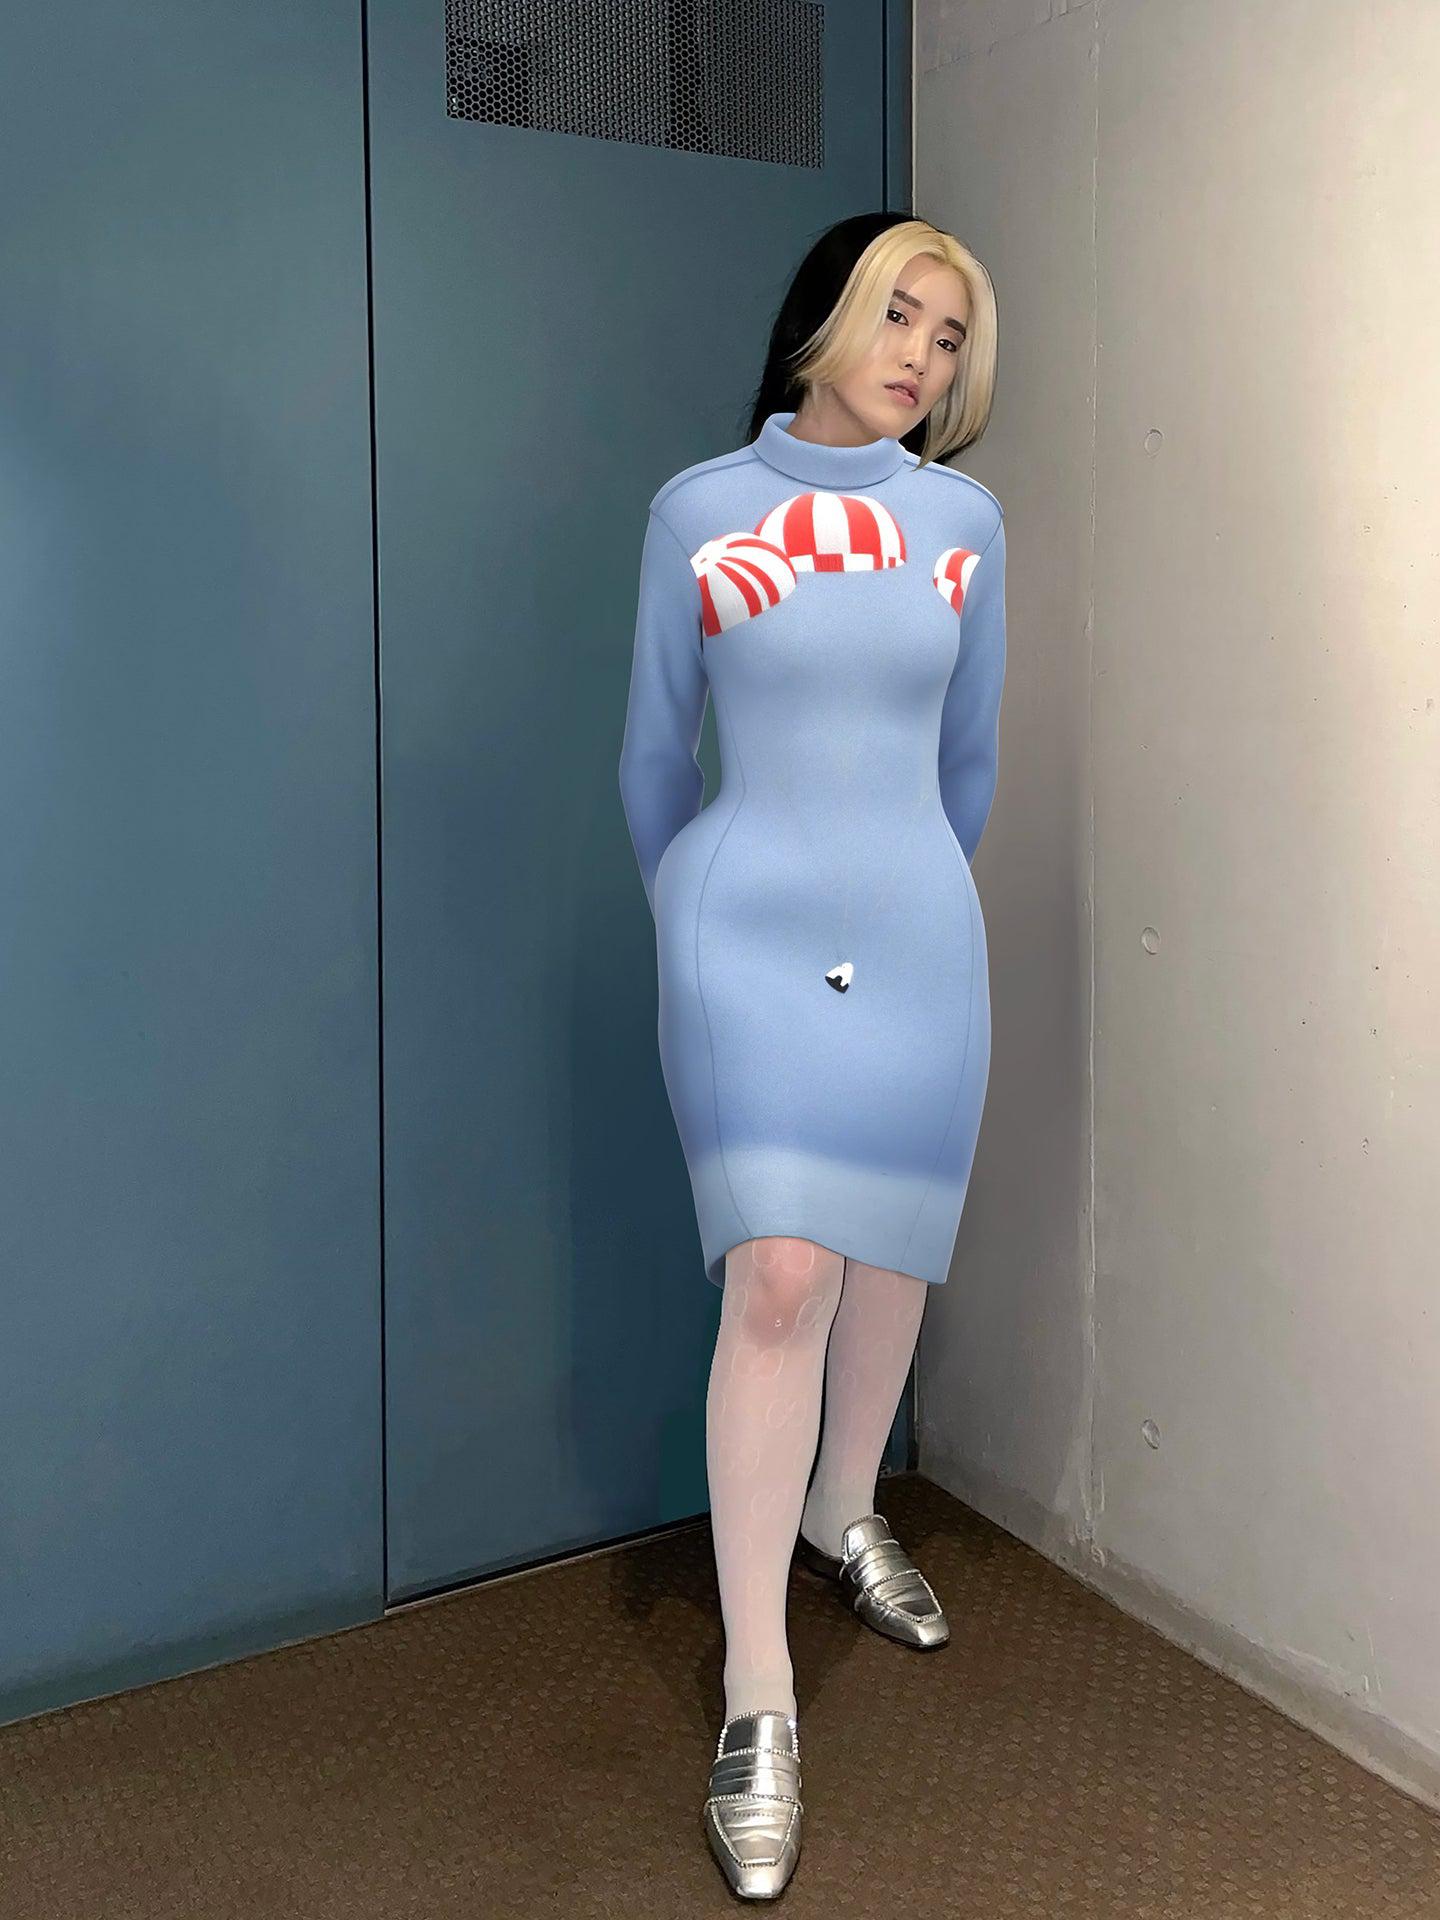 Space Dress - You become responsible, forever, for what you have tamed by DRESSX